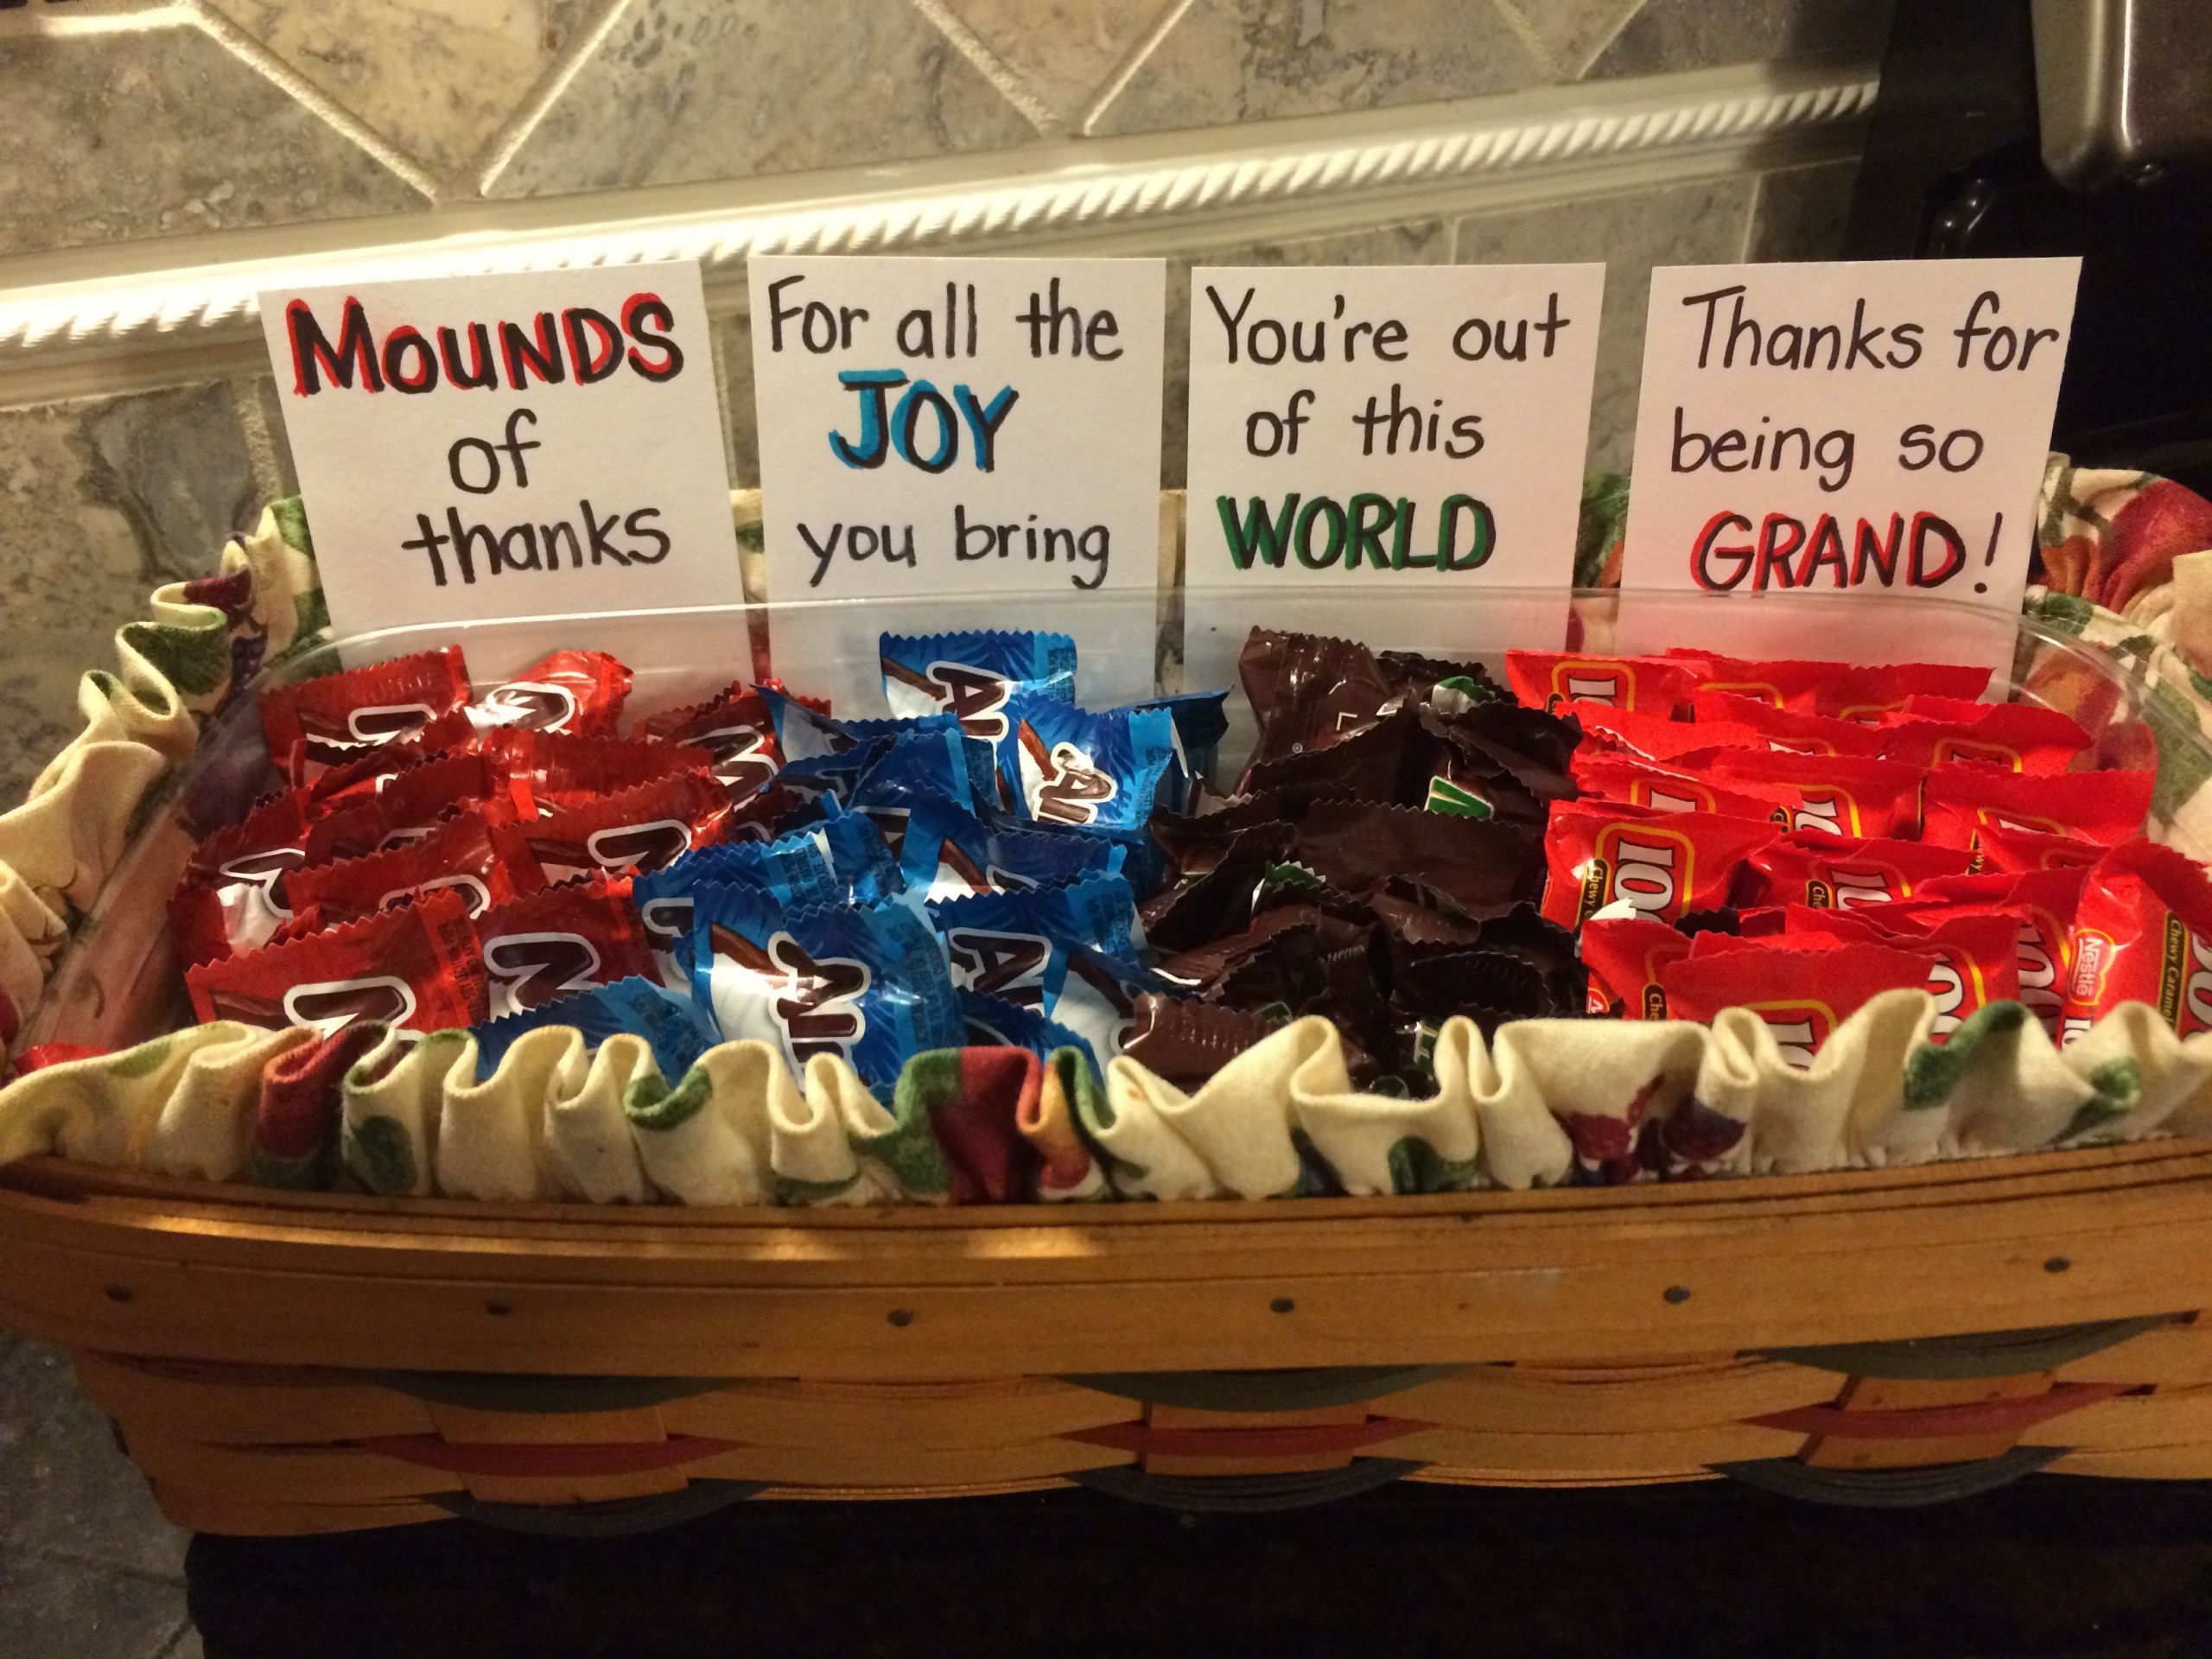 Employee Gift Basket Ideas
 Give thanks to a lot of people with chocolate Take a